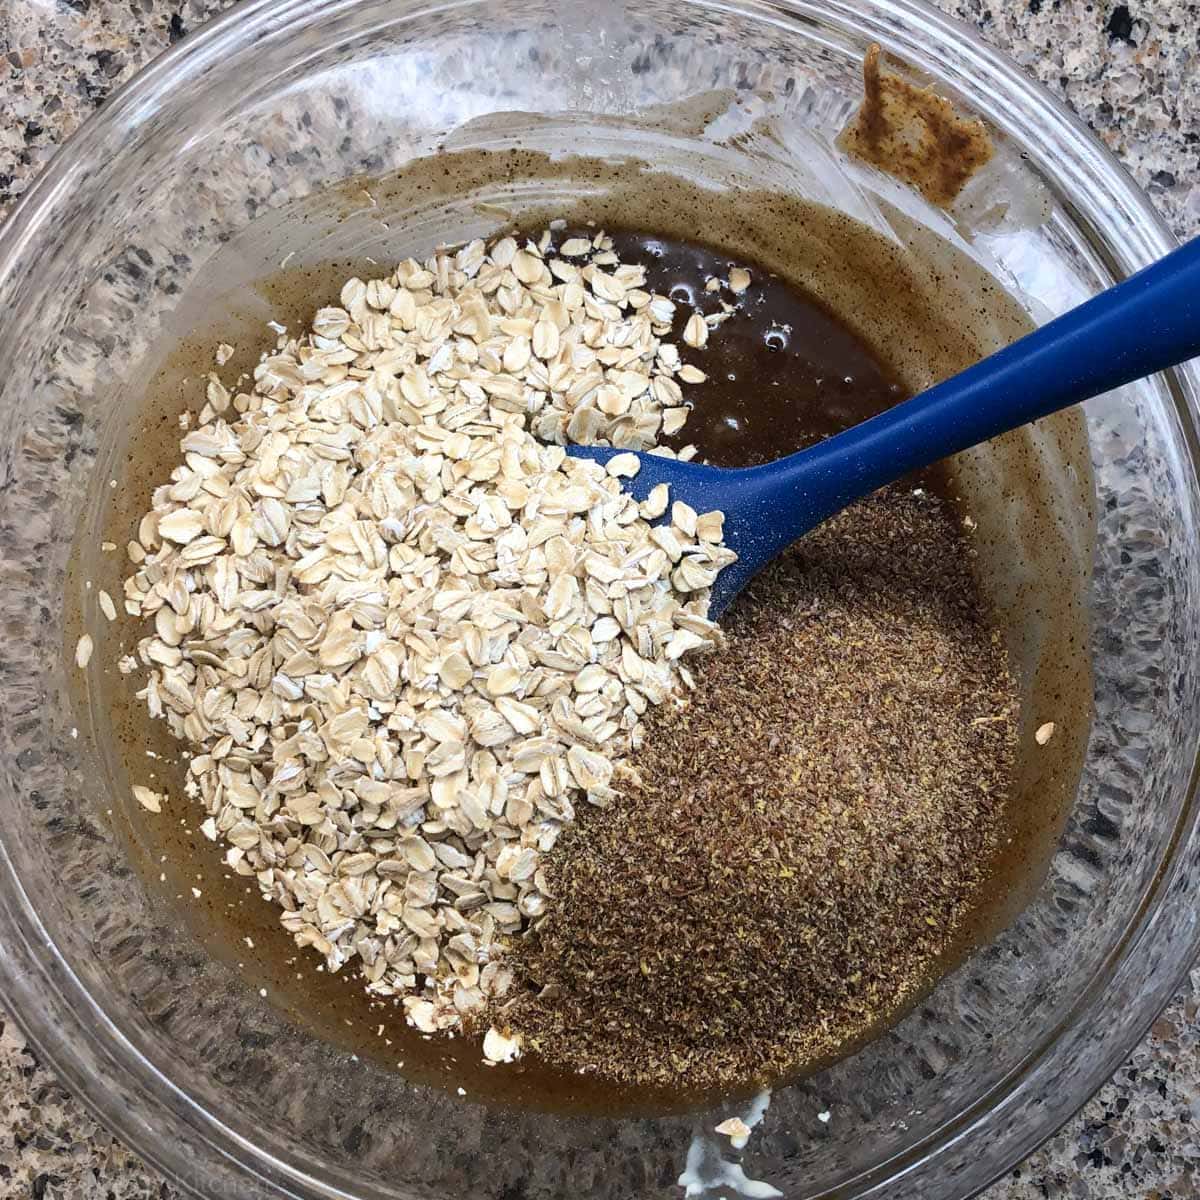 Oats and flax being mixed into a brown batter